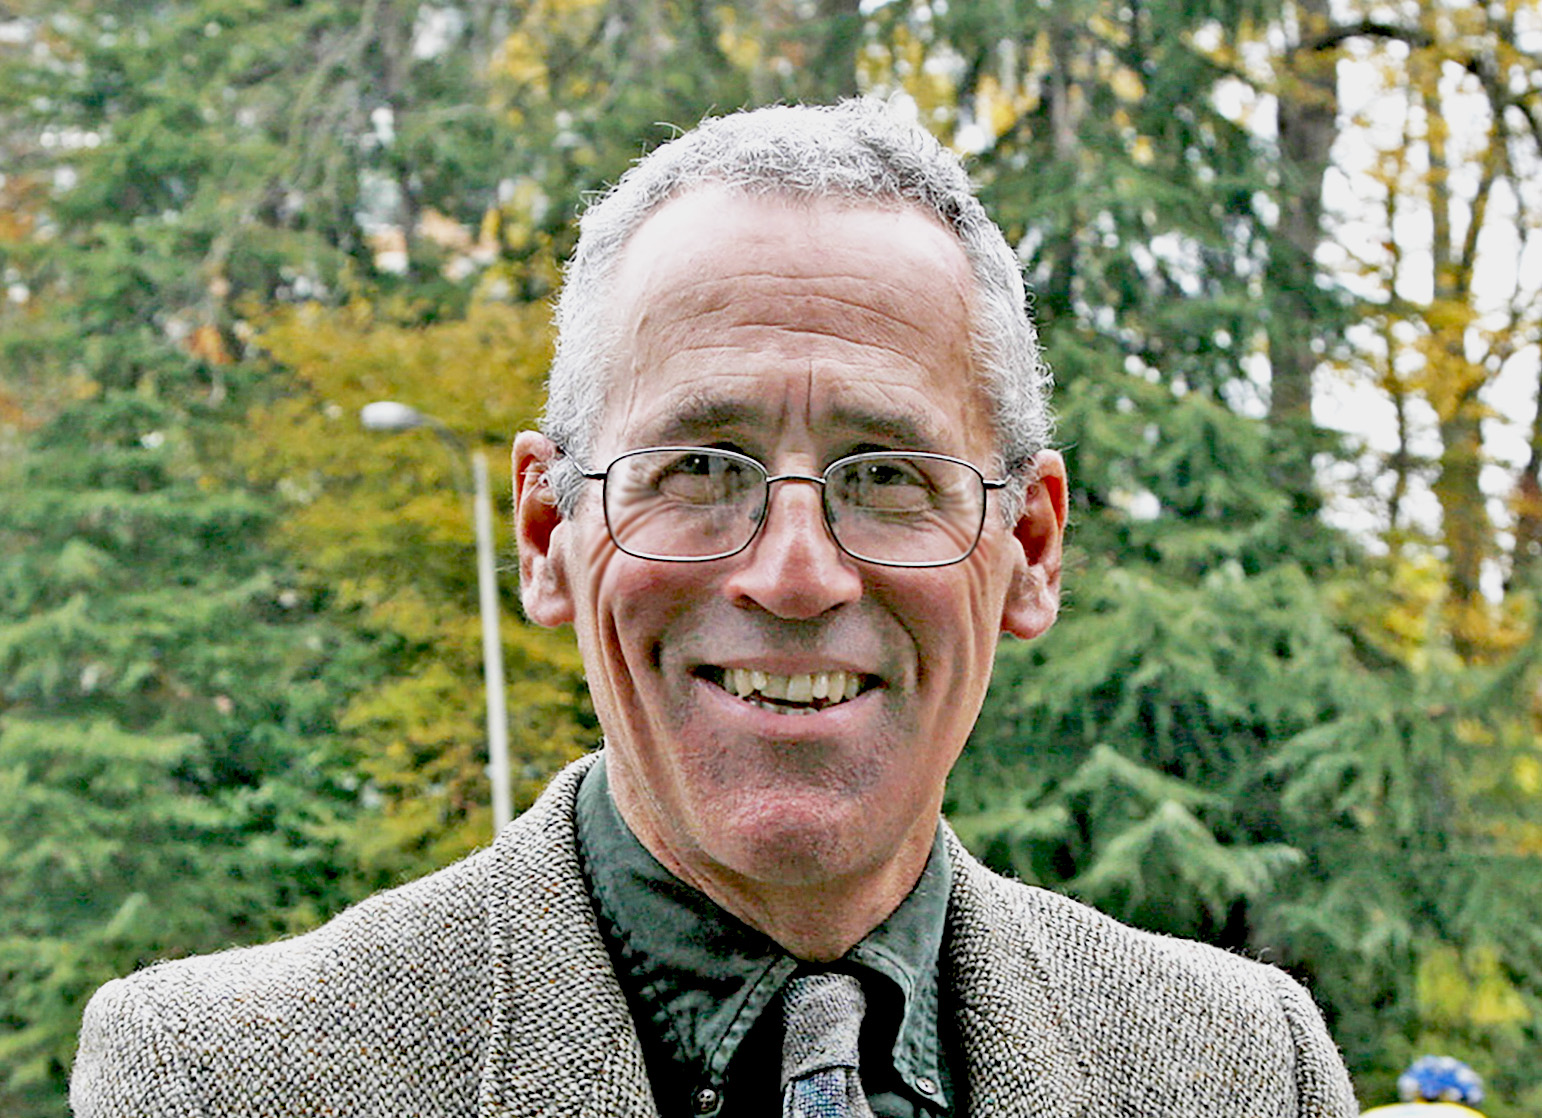 Joe Butwin smiles at the camera in suit and glasses, in front of trees